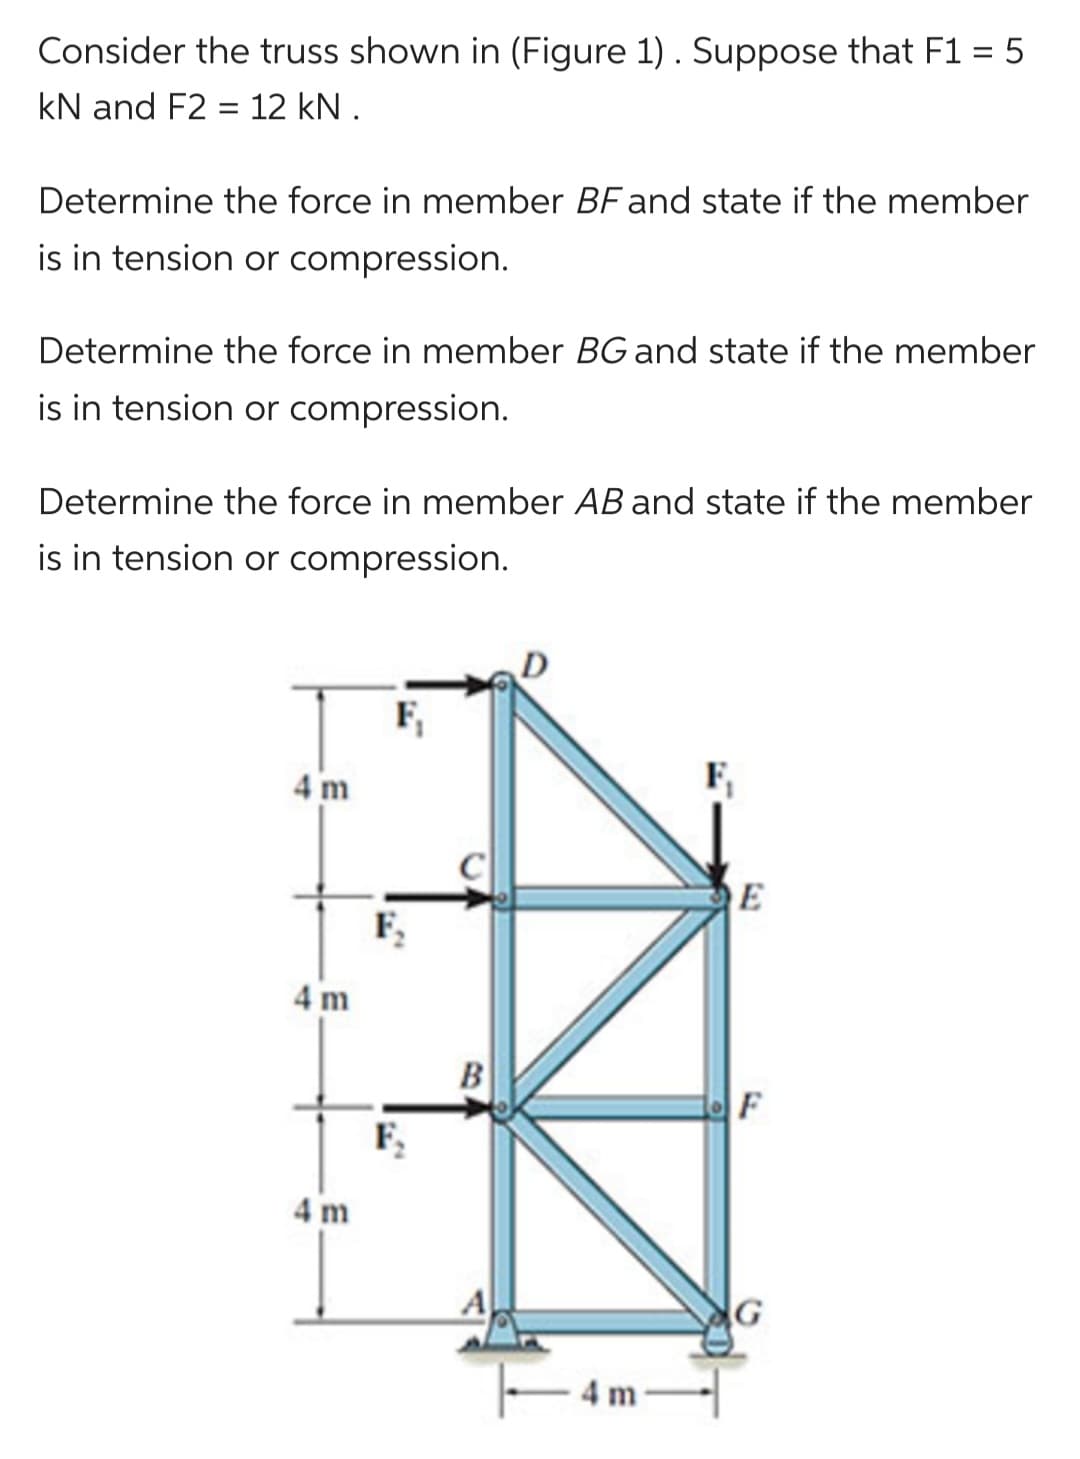 Consider the truss shown in (Figure 1). Suppose that F1 = 5
kN and F2 = 12 kN.
Determine the force in member BF and state if the member
is in tension or compression.
Determine the force in member BG and state if the member
is in tension or compression.
Determine the force in member AB and state if the member
is in tension or compression.
4 m
4 m
4 m
F₁
F₂
F₂
B
A
4 m
F₁
E
F